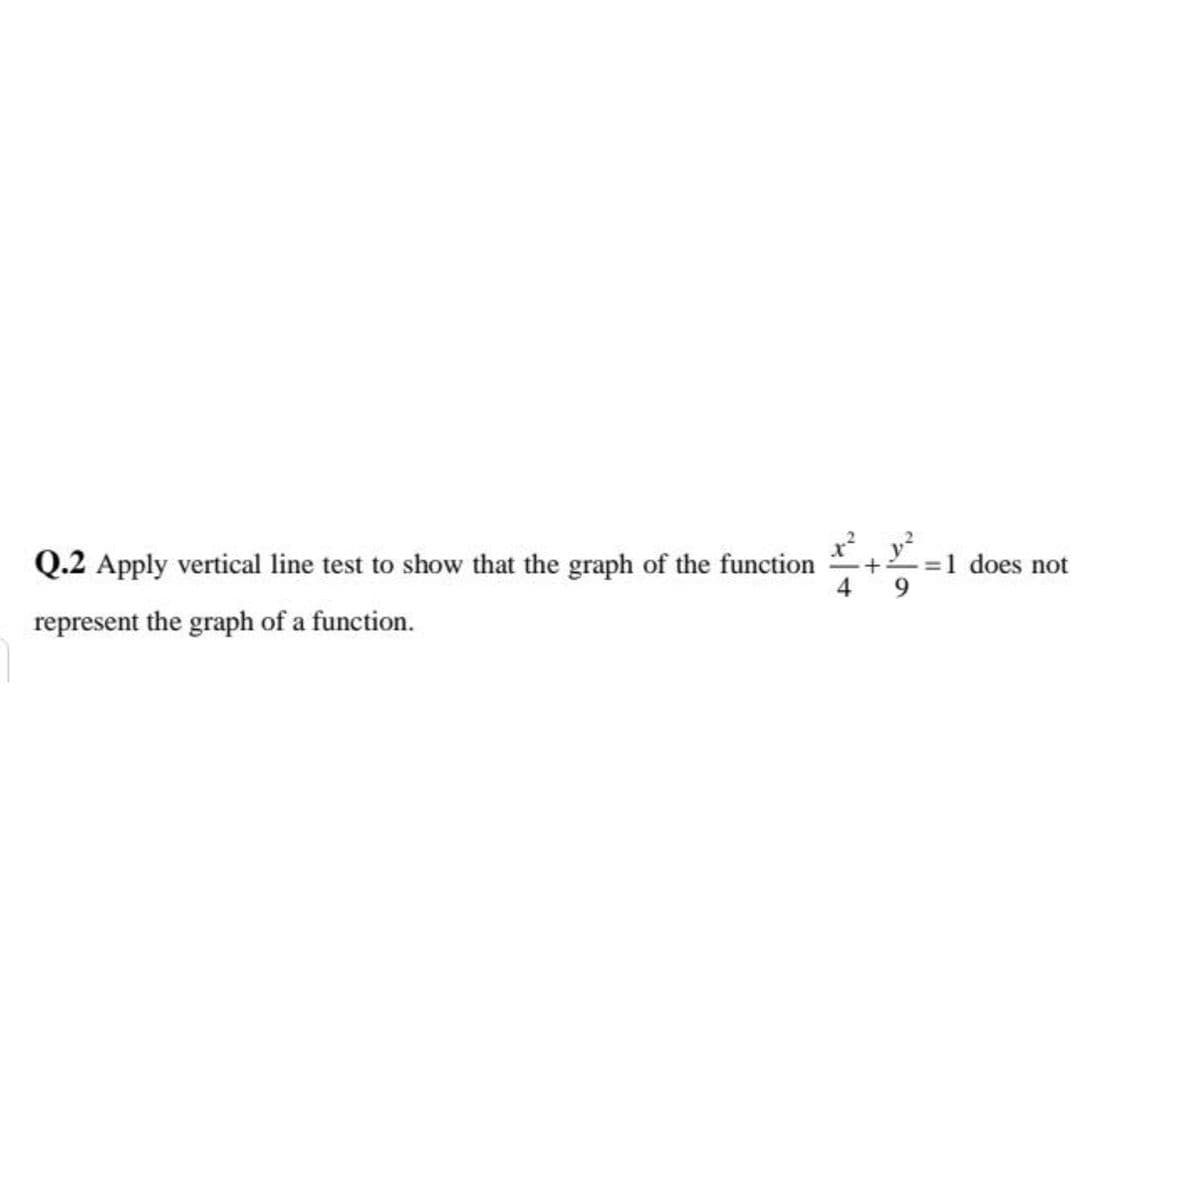 Q.2 Apply vertical line test to show that the graph of the function
4
=1 does not
represent the graph of a function.
